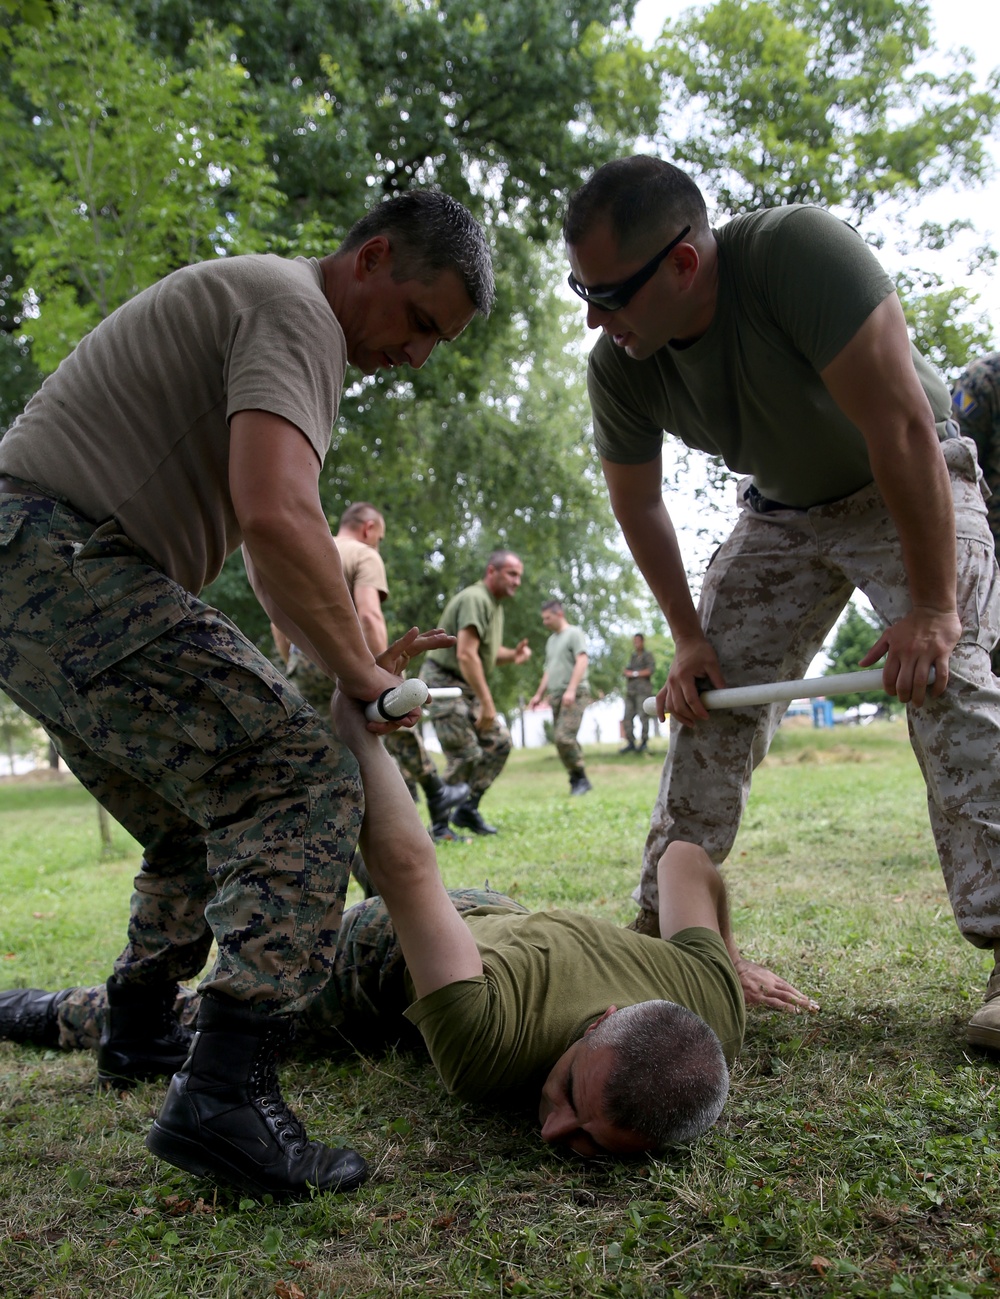 U.S. Marines enhance Non-Lethal Systems with Bosnian Forces